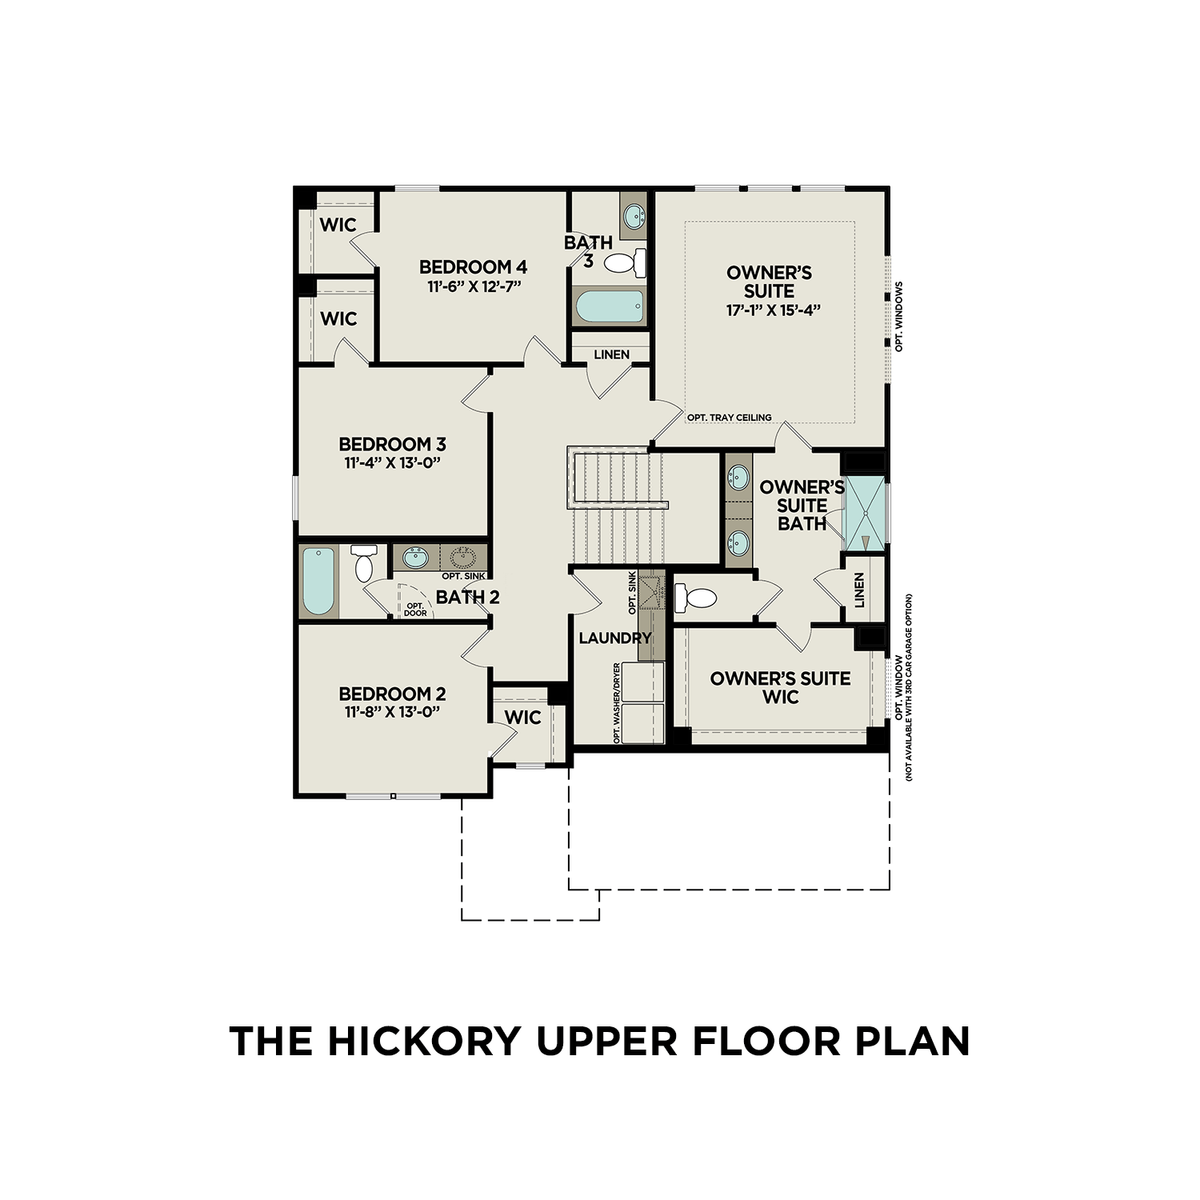 2 - The Hickory B floor plan layout for 473 Black Walnut Drive in Davidson Homes' Carellton community.